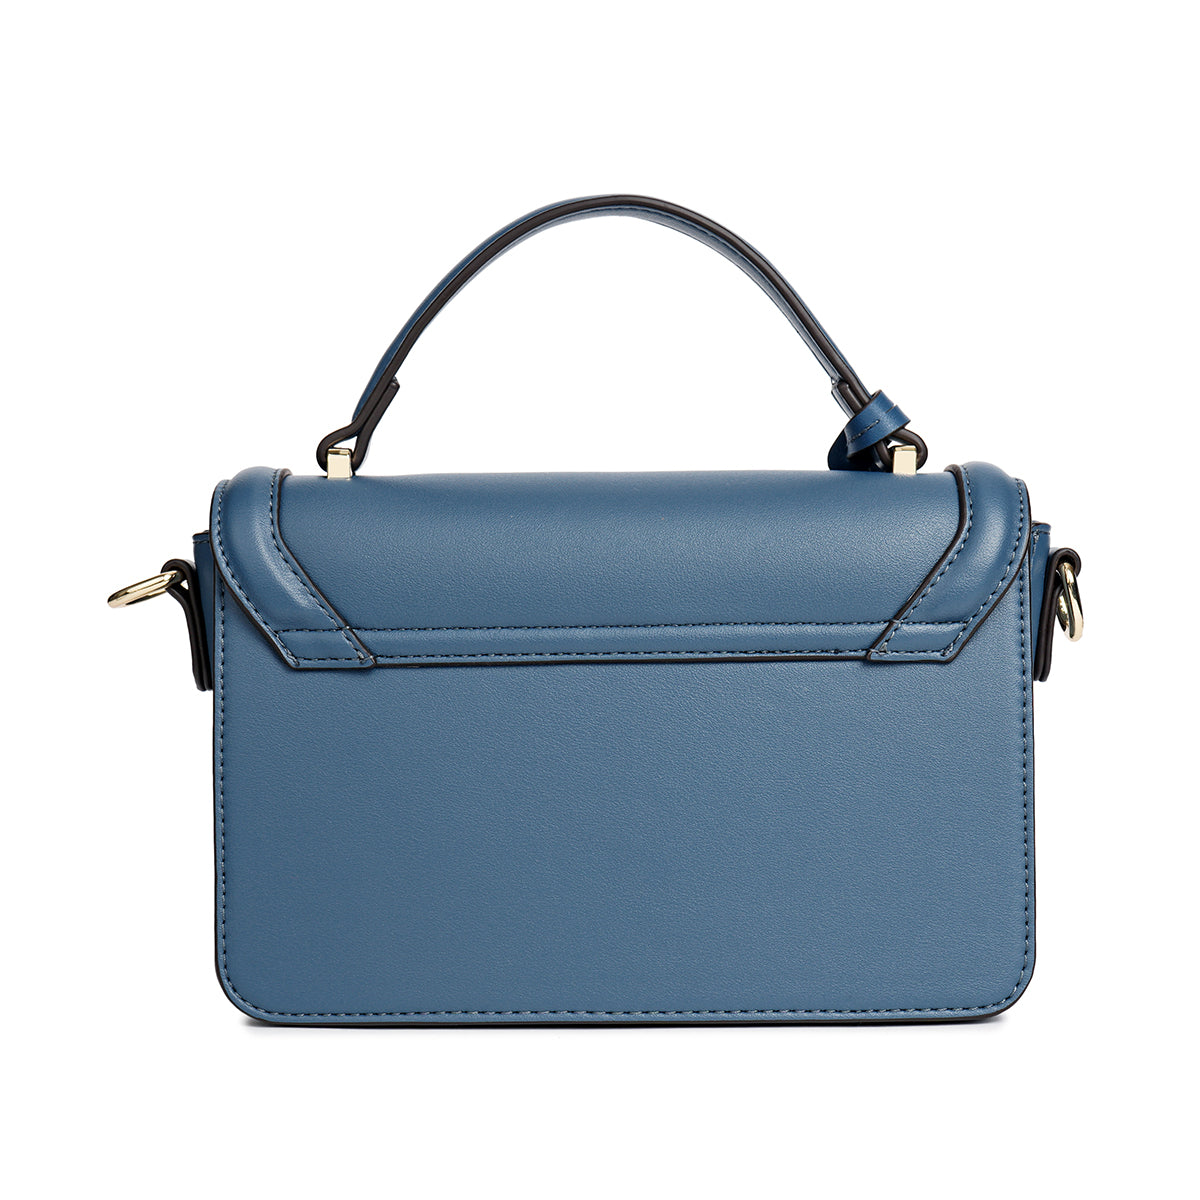 Practical and light handbag with a shoulder strap, width 21 cm, in maroon or blue colors